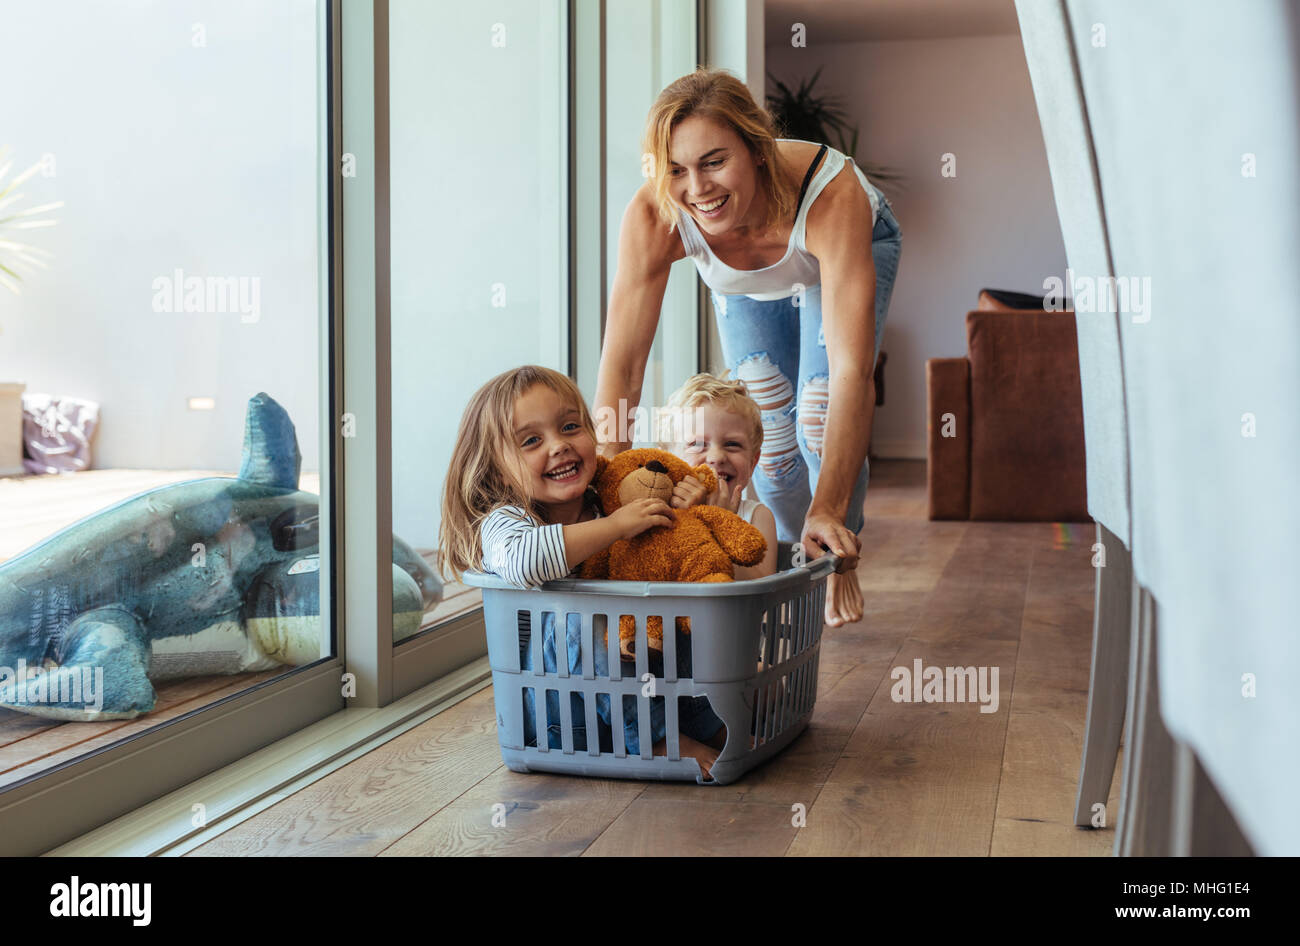 Happy young mother pushing children sitting in laundry basket. Mother and children playing at home. Stock Photo